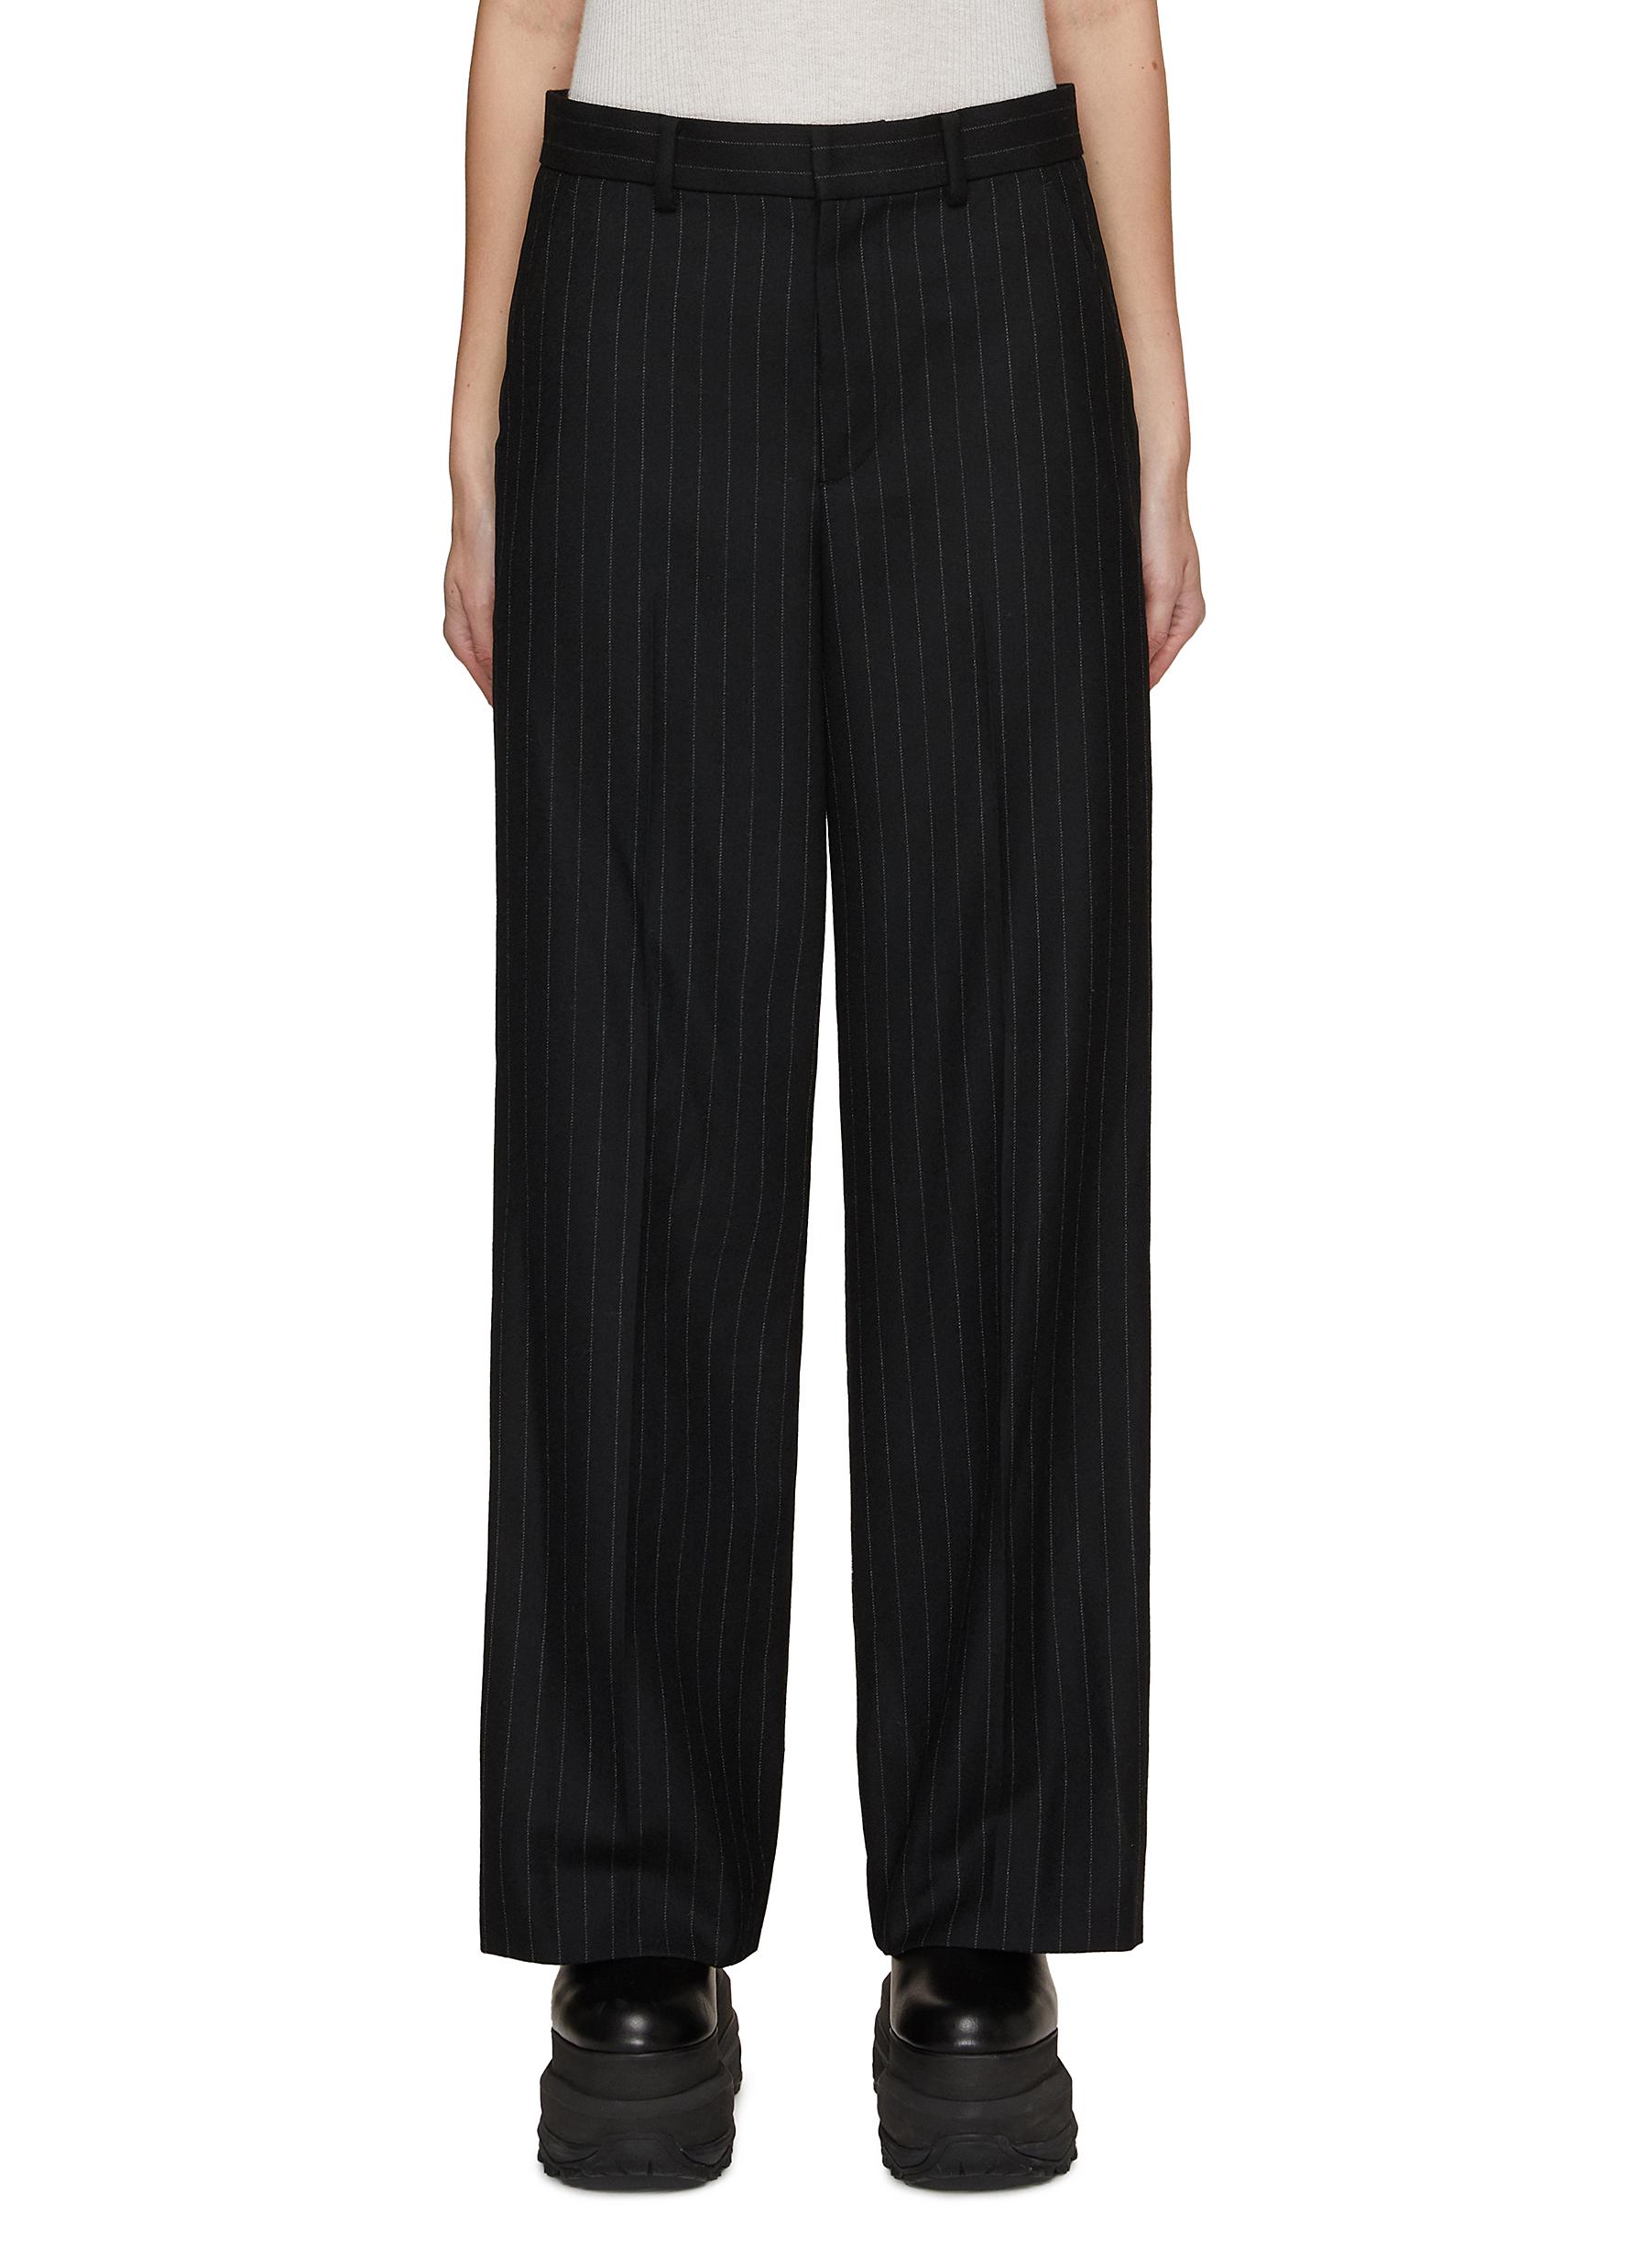 Chalk Stripe Belted Detail Suiting Pants